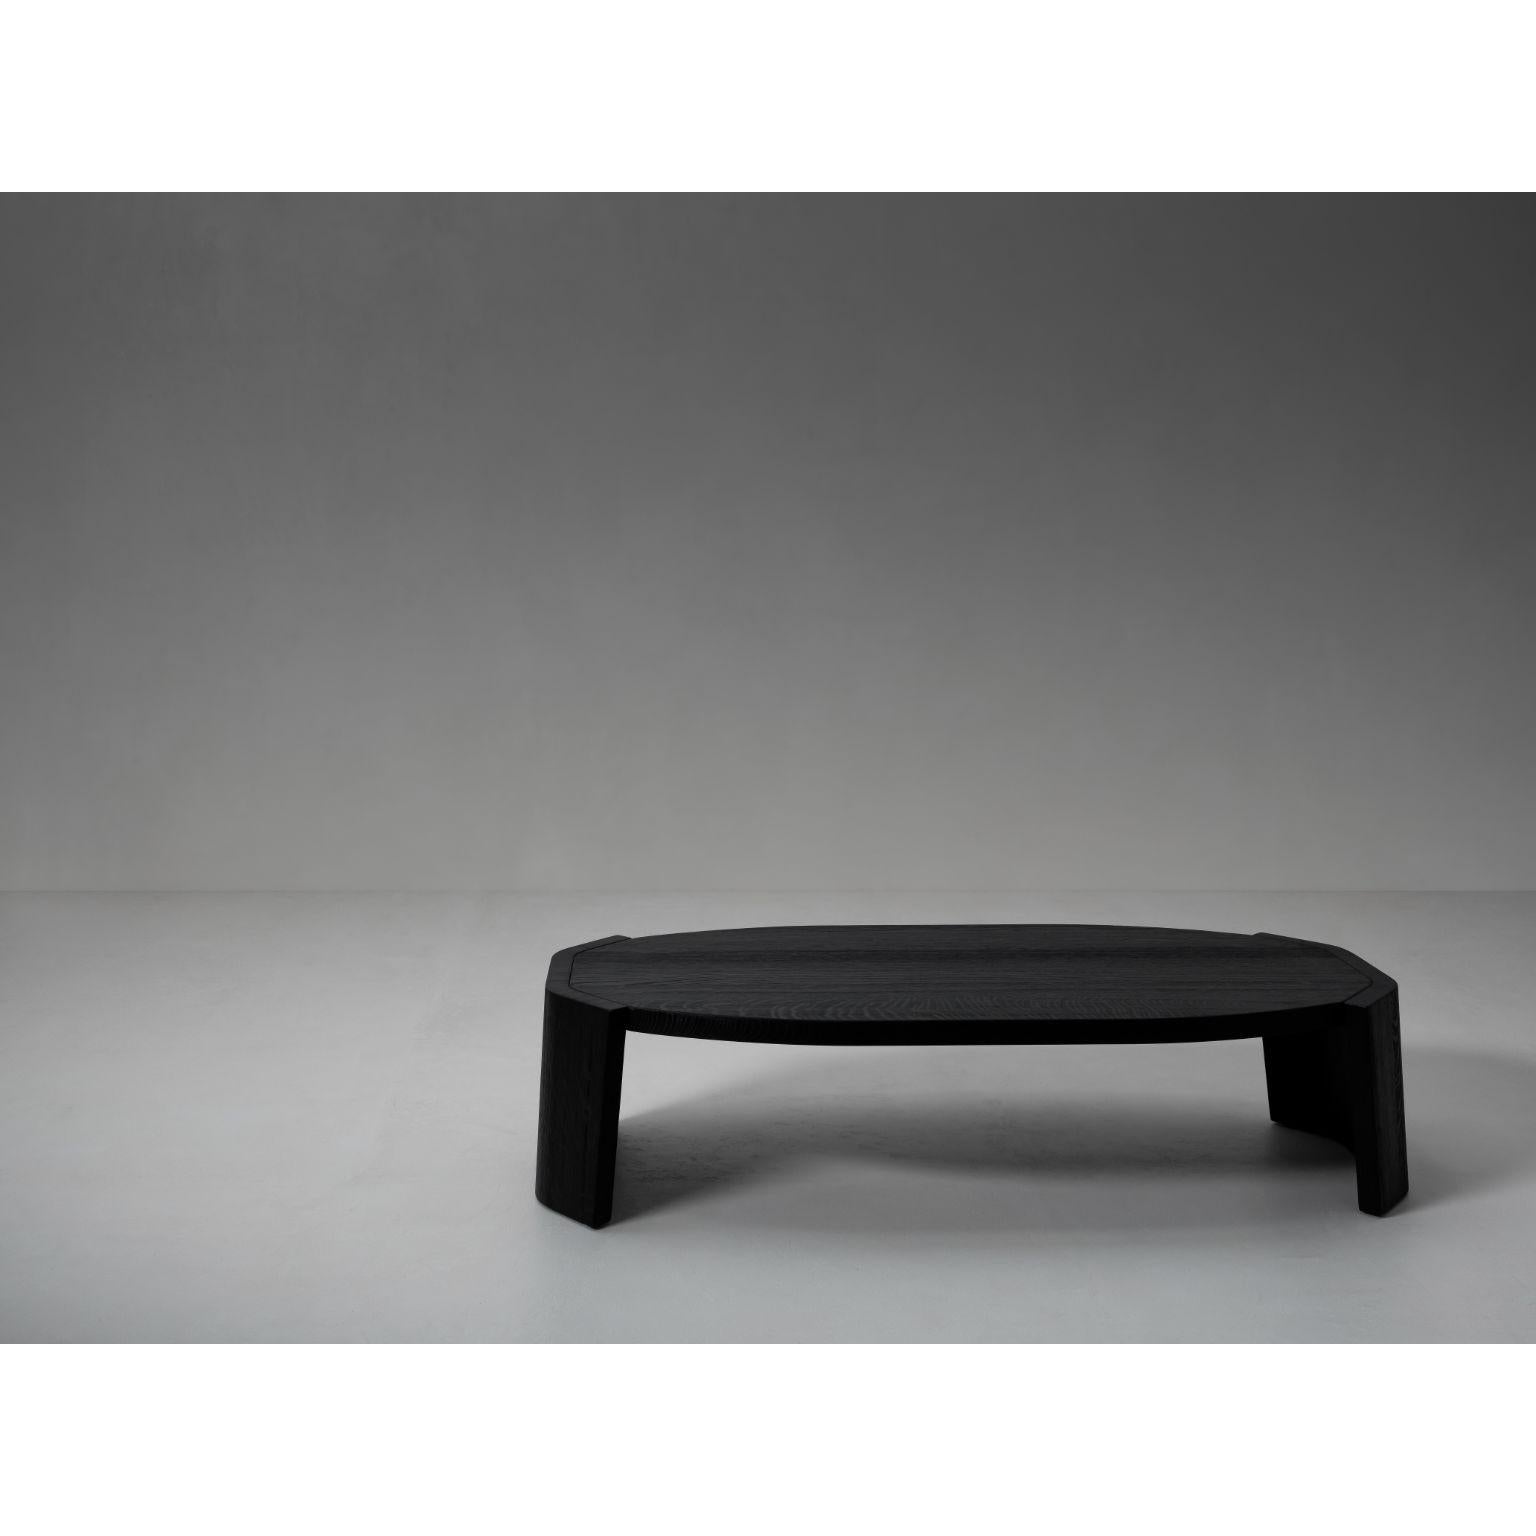 Jak Coffee Table by Van Rossum
Dimensions: D 150 x W 70 x H 33 cm
Materials: Oak Wood


For over 40 years, Van Rossum has designed and handmade solid and sustainable furniture from the workshop in Bergharen, the Netherlands. Exquisite craftsmanship,